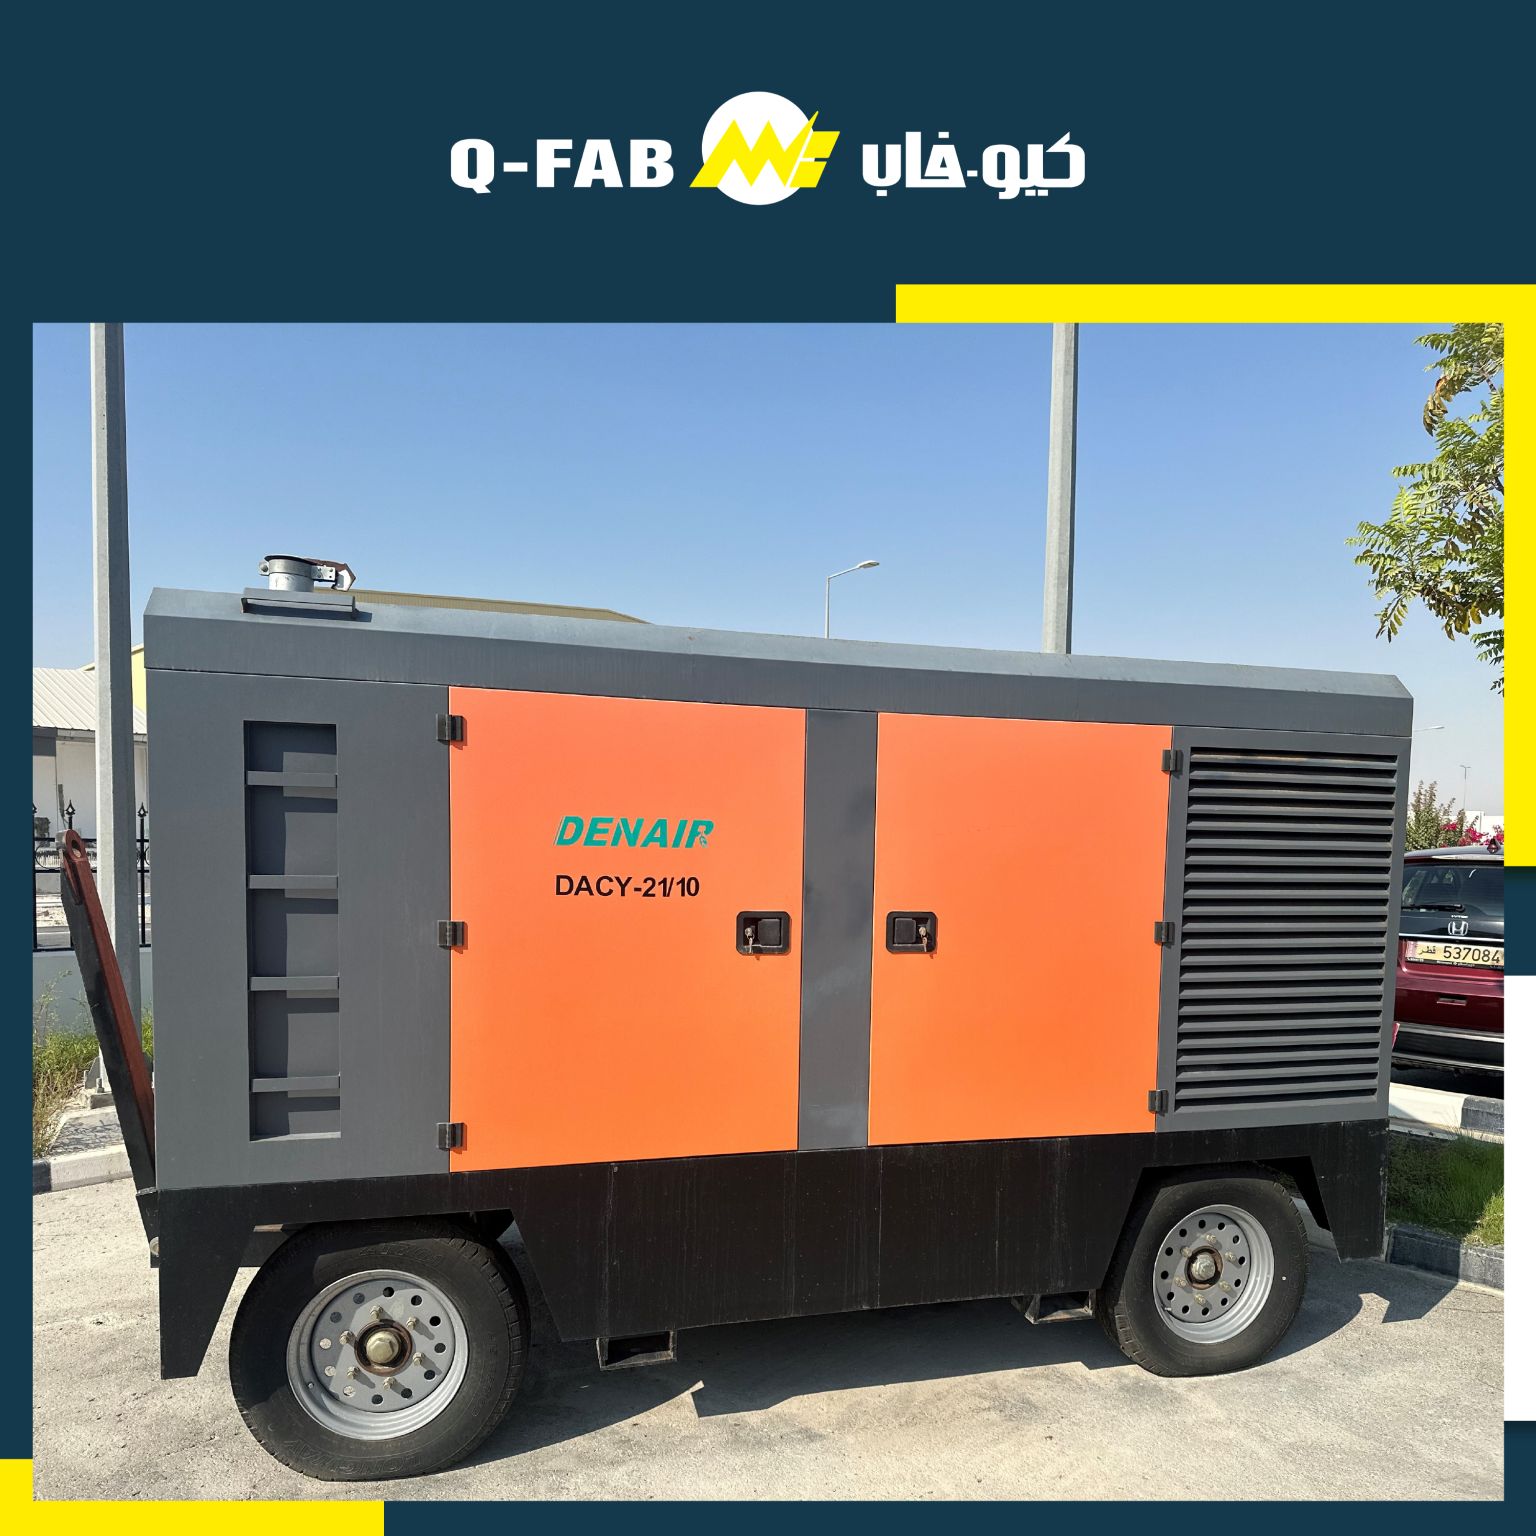 Q-Fab and Denair - Your One-Stop Shop for Premium Air Compressors